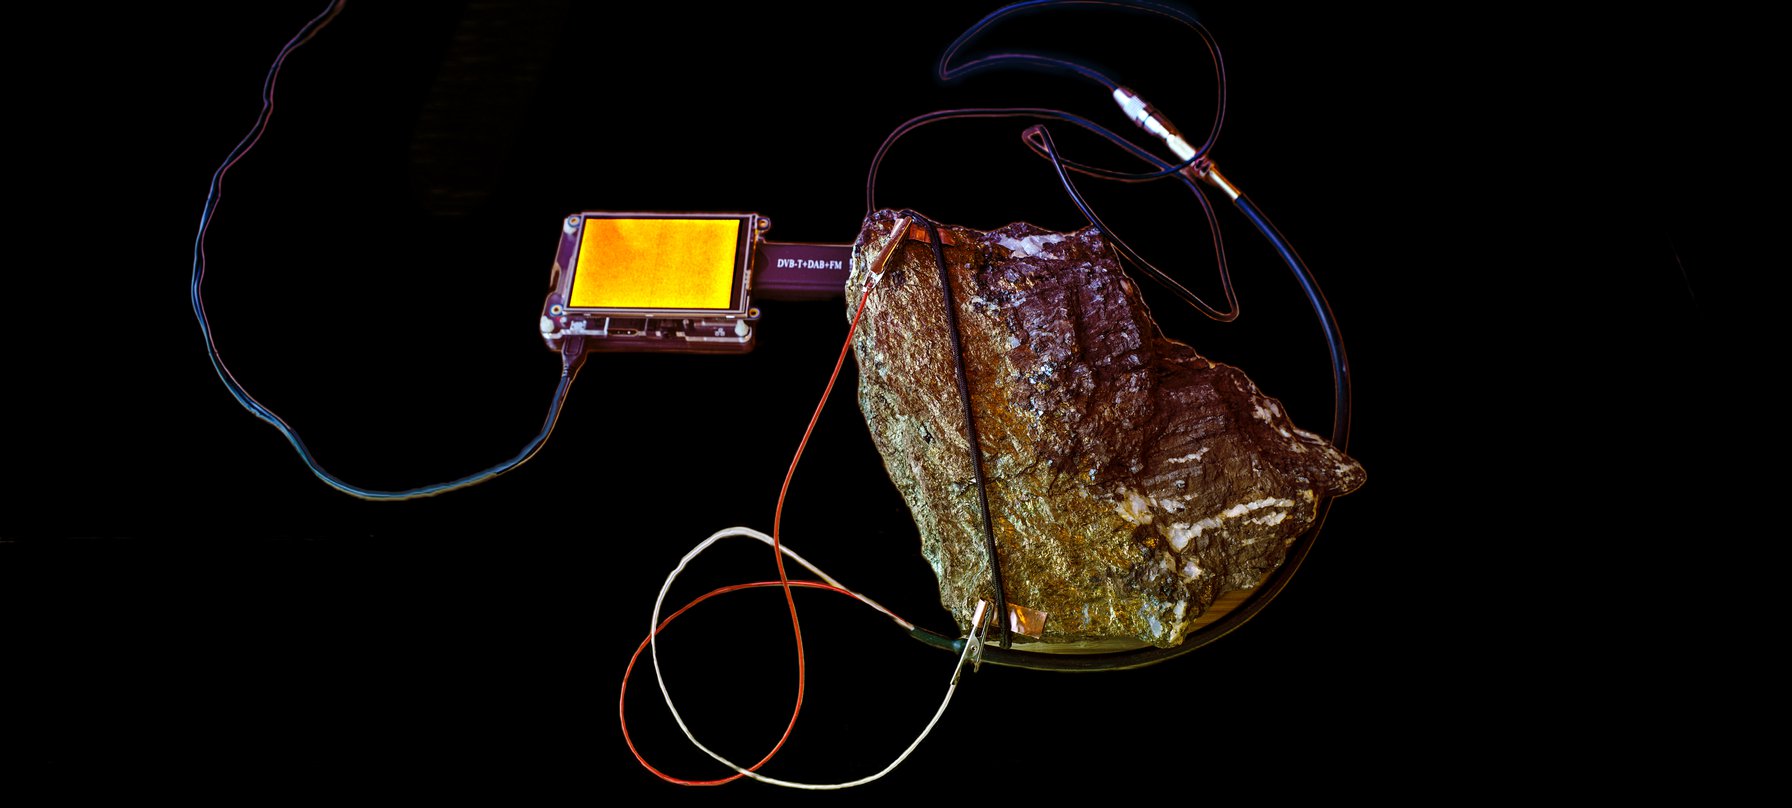 Ore-ic Radios and The Queen River Battery image. A photo of a rock covered in wires connecting it to a radio. Credit Haines and Hinterding.